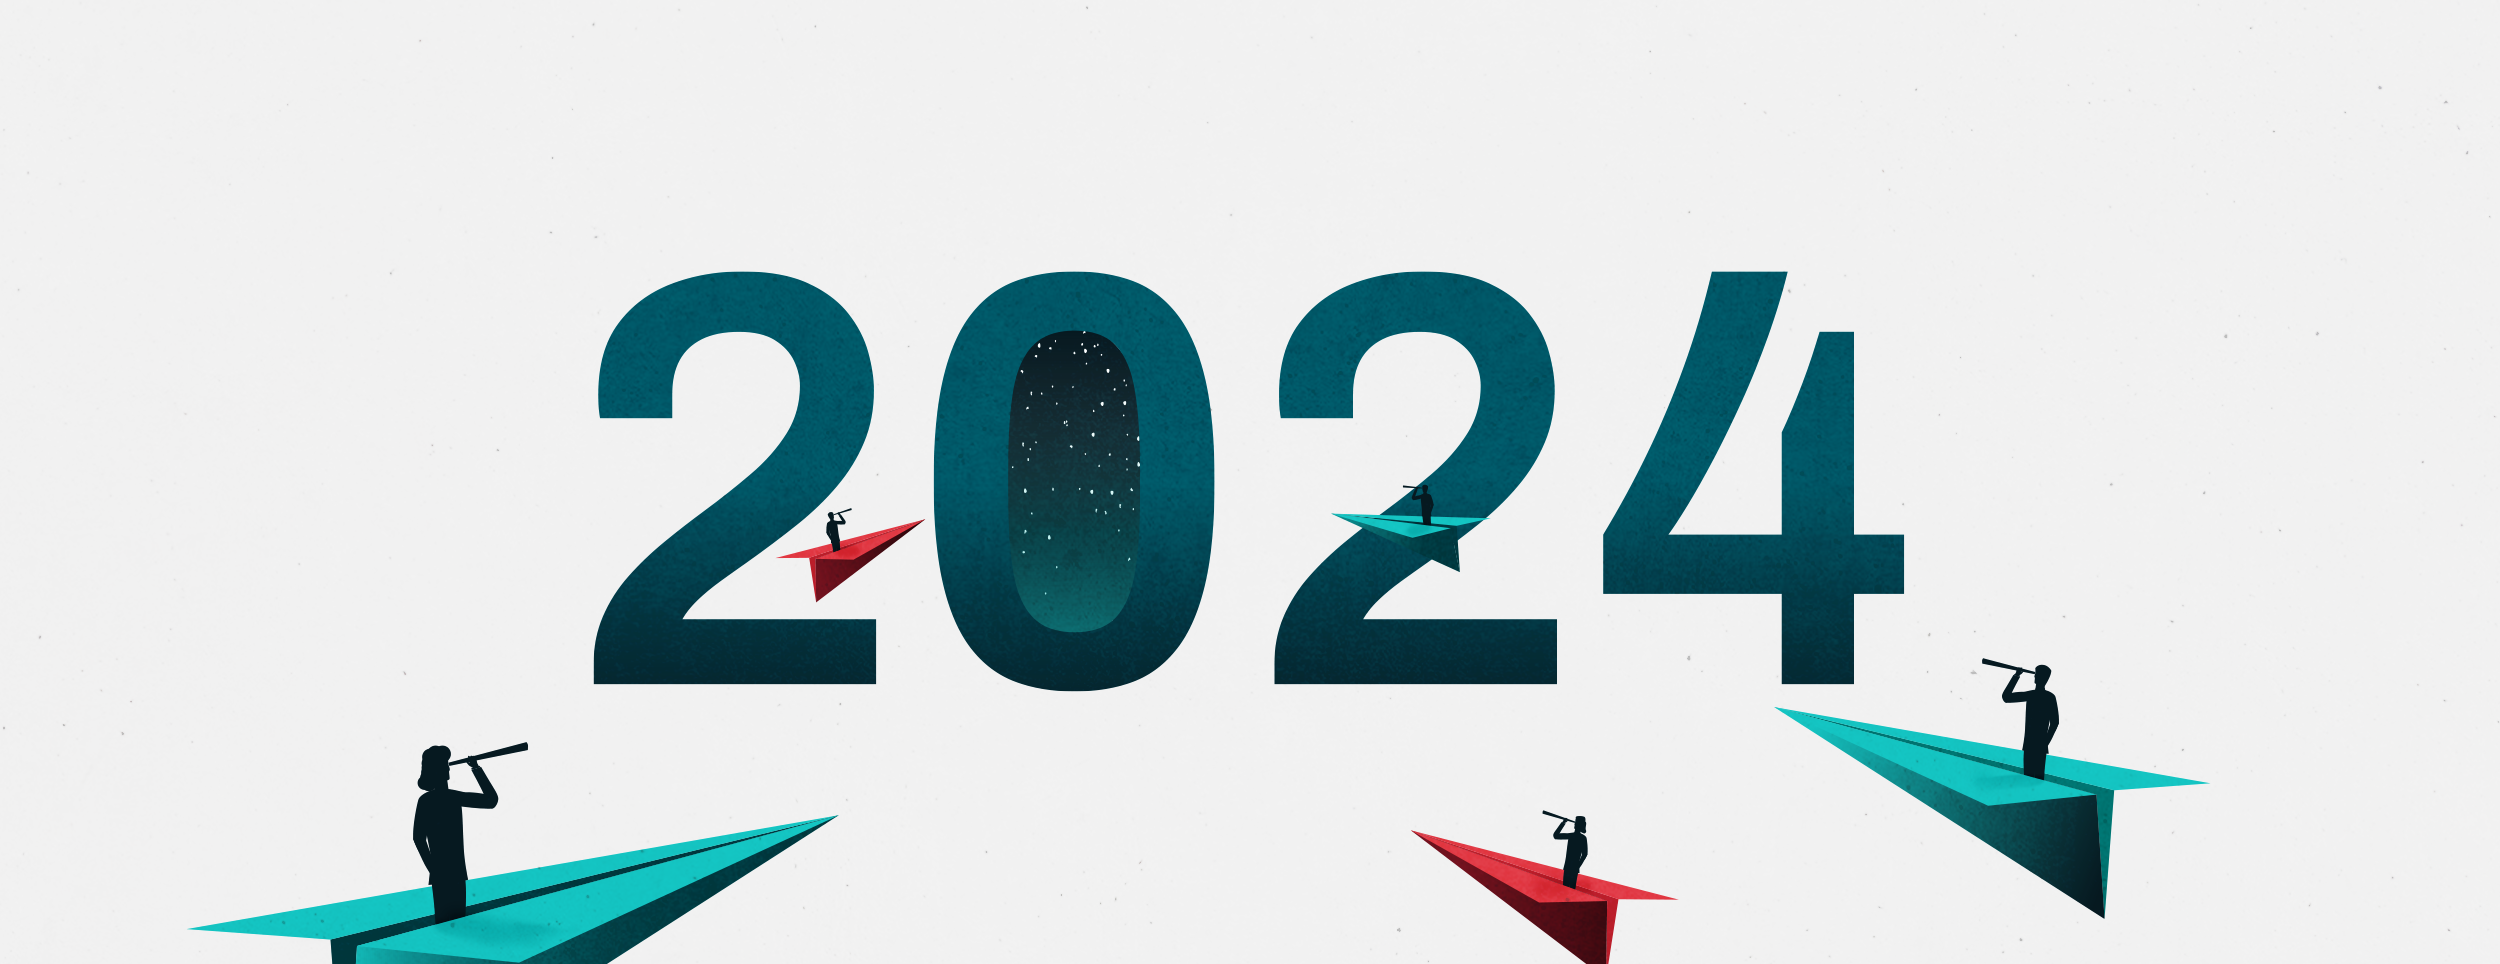 Automation predictions for 2024